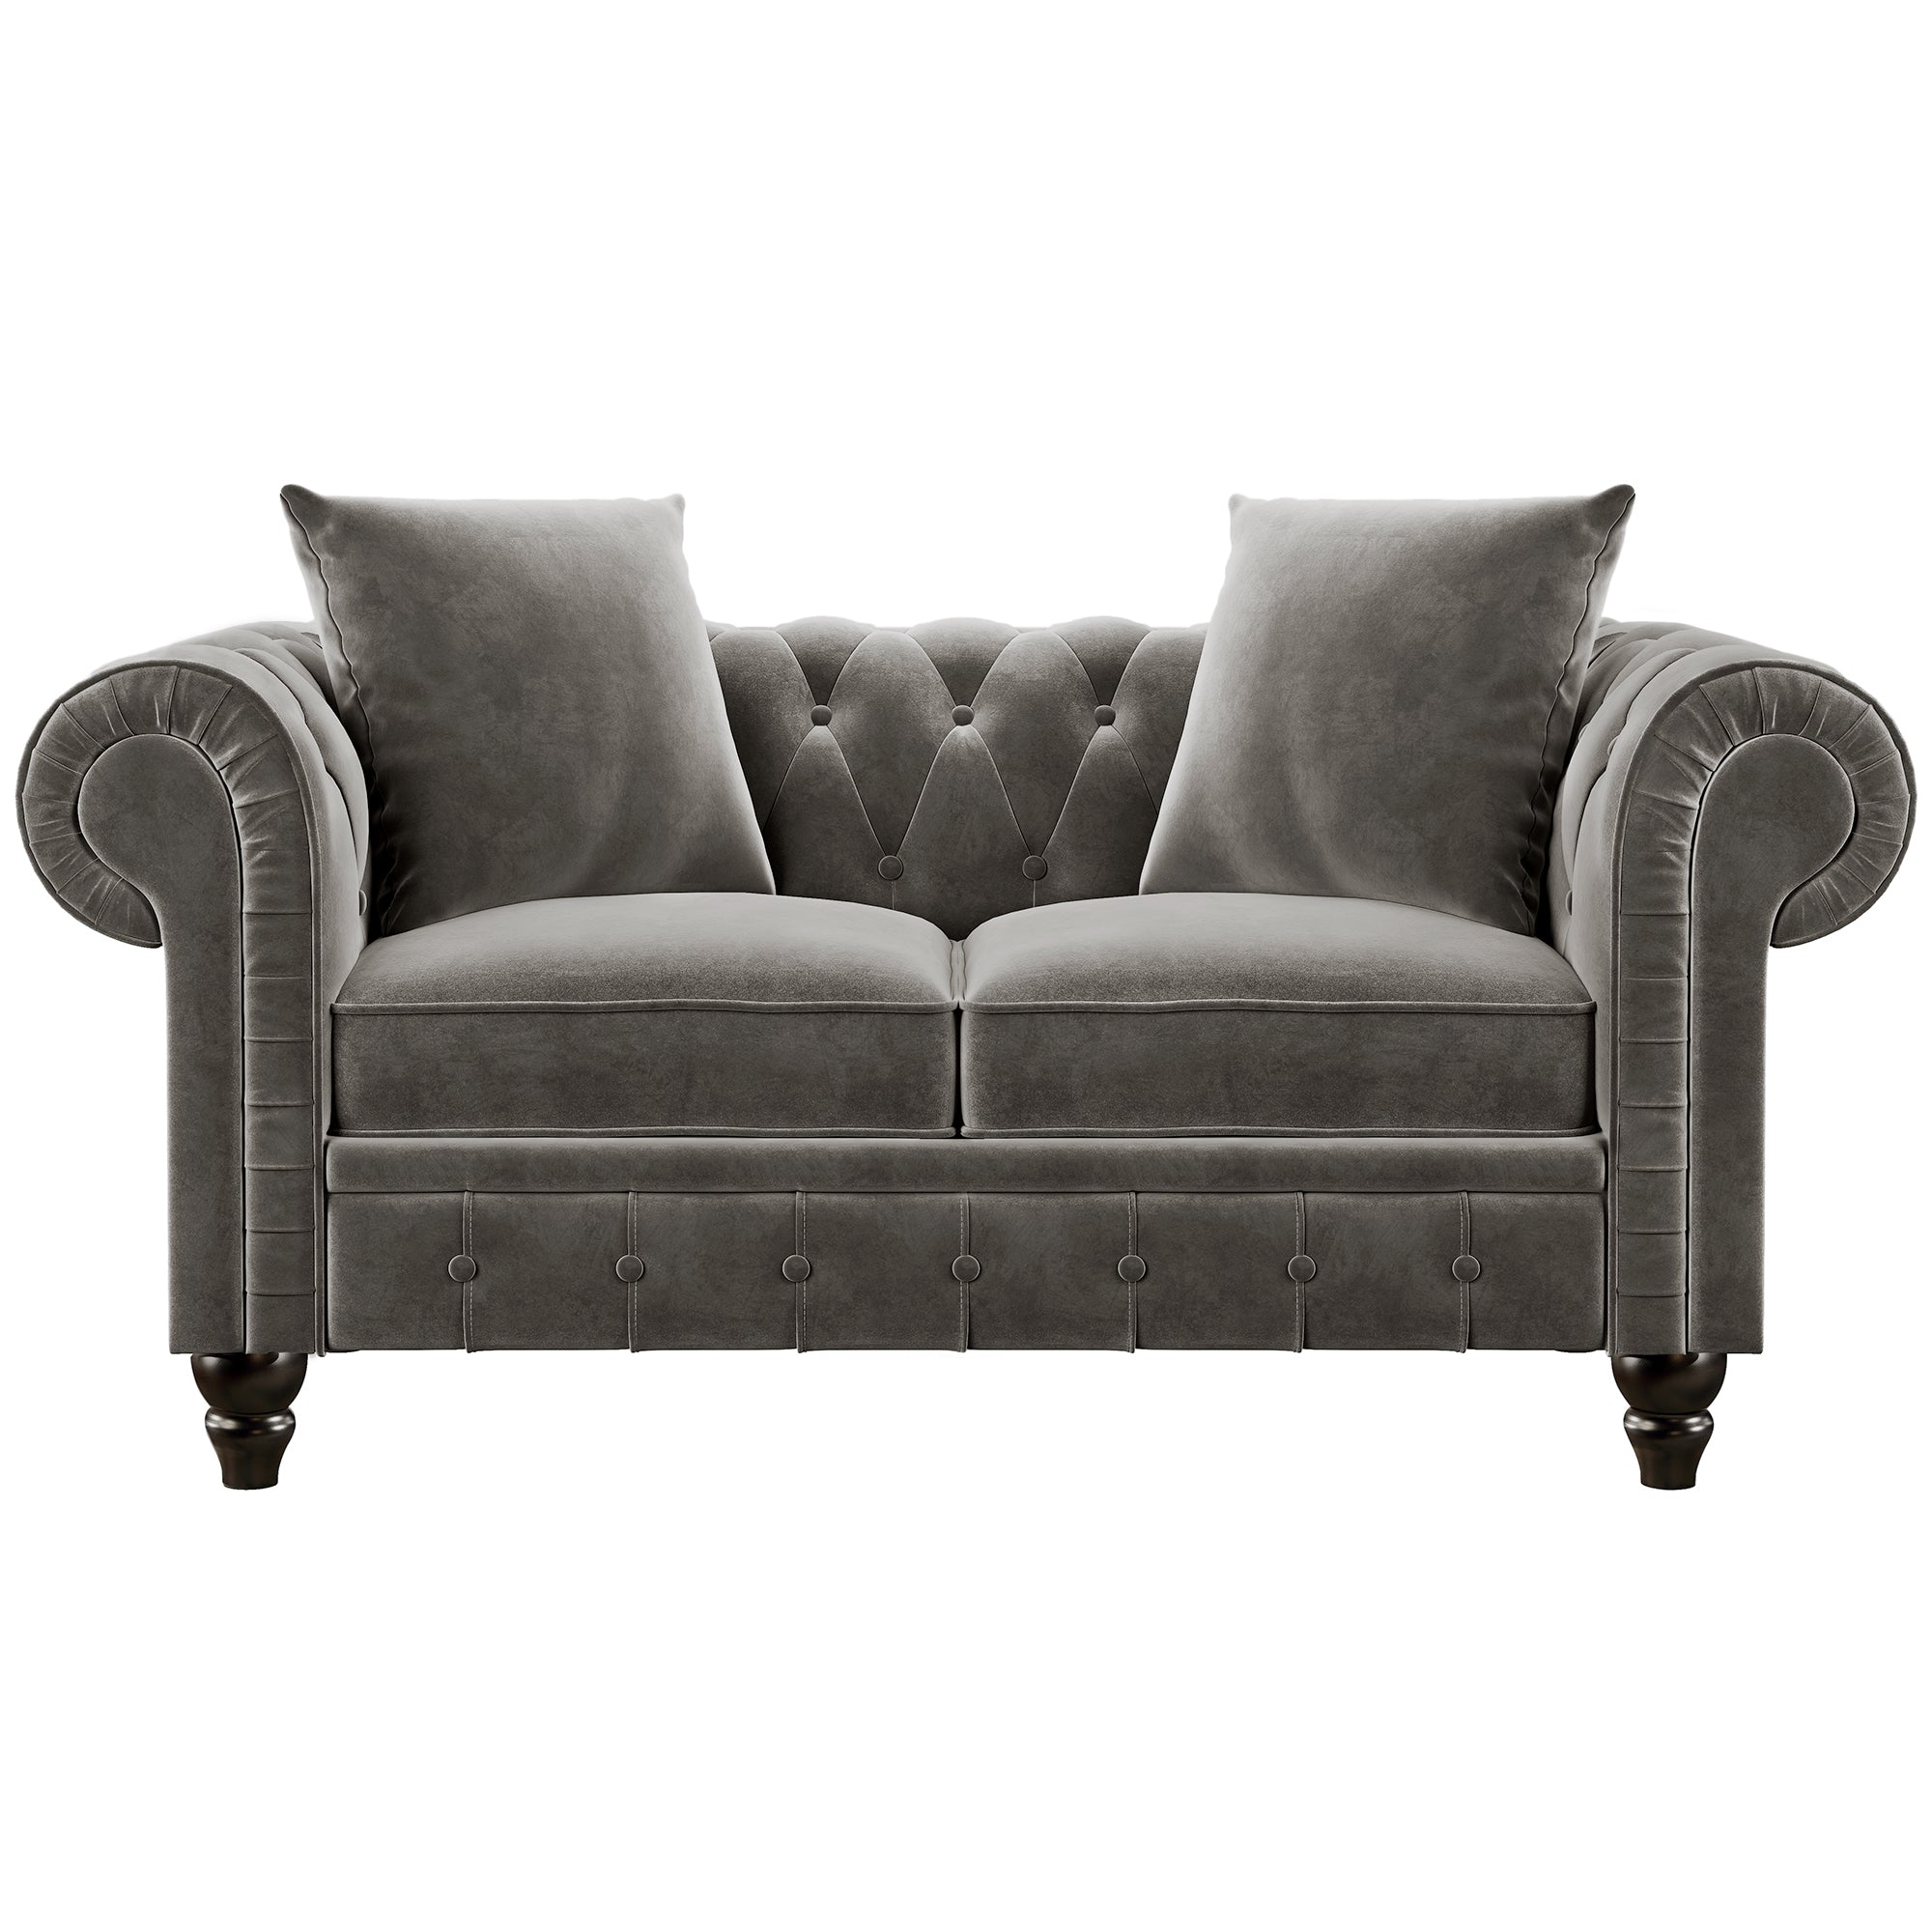 63" Deep Button Tufted Velvet Loveseat Sofa Roll Arm Classic Chesterfield Settee,2 Pillows included